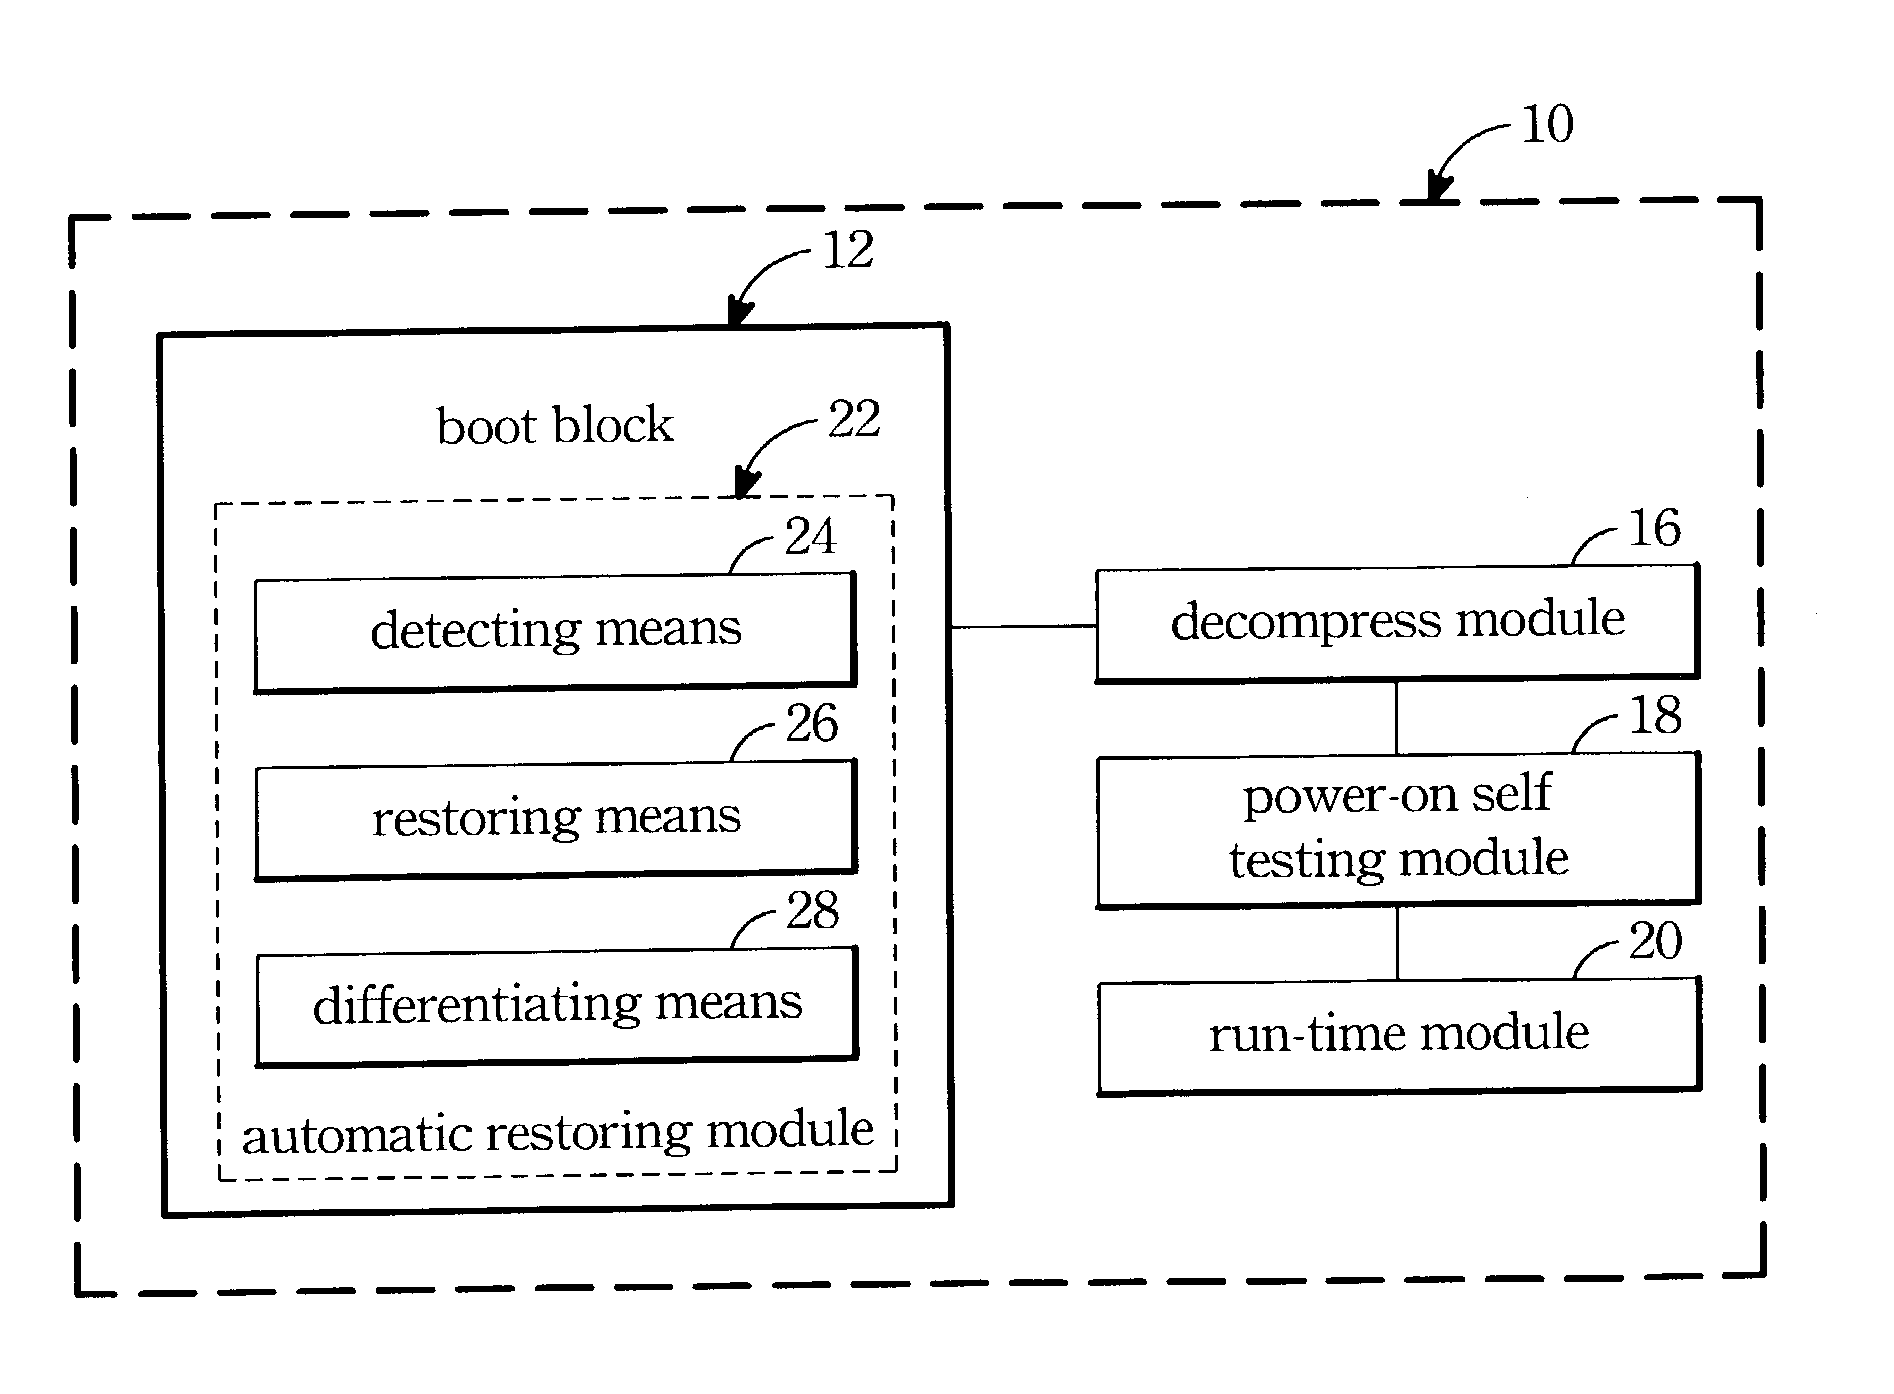 Module and method for automatic restoring BIOS device